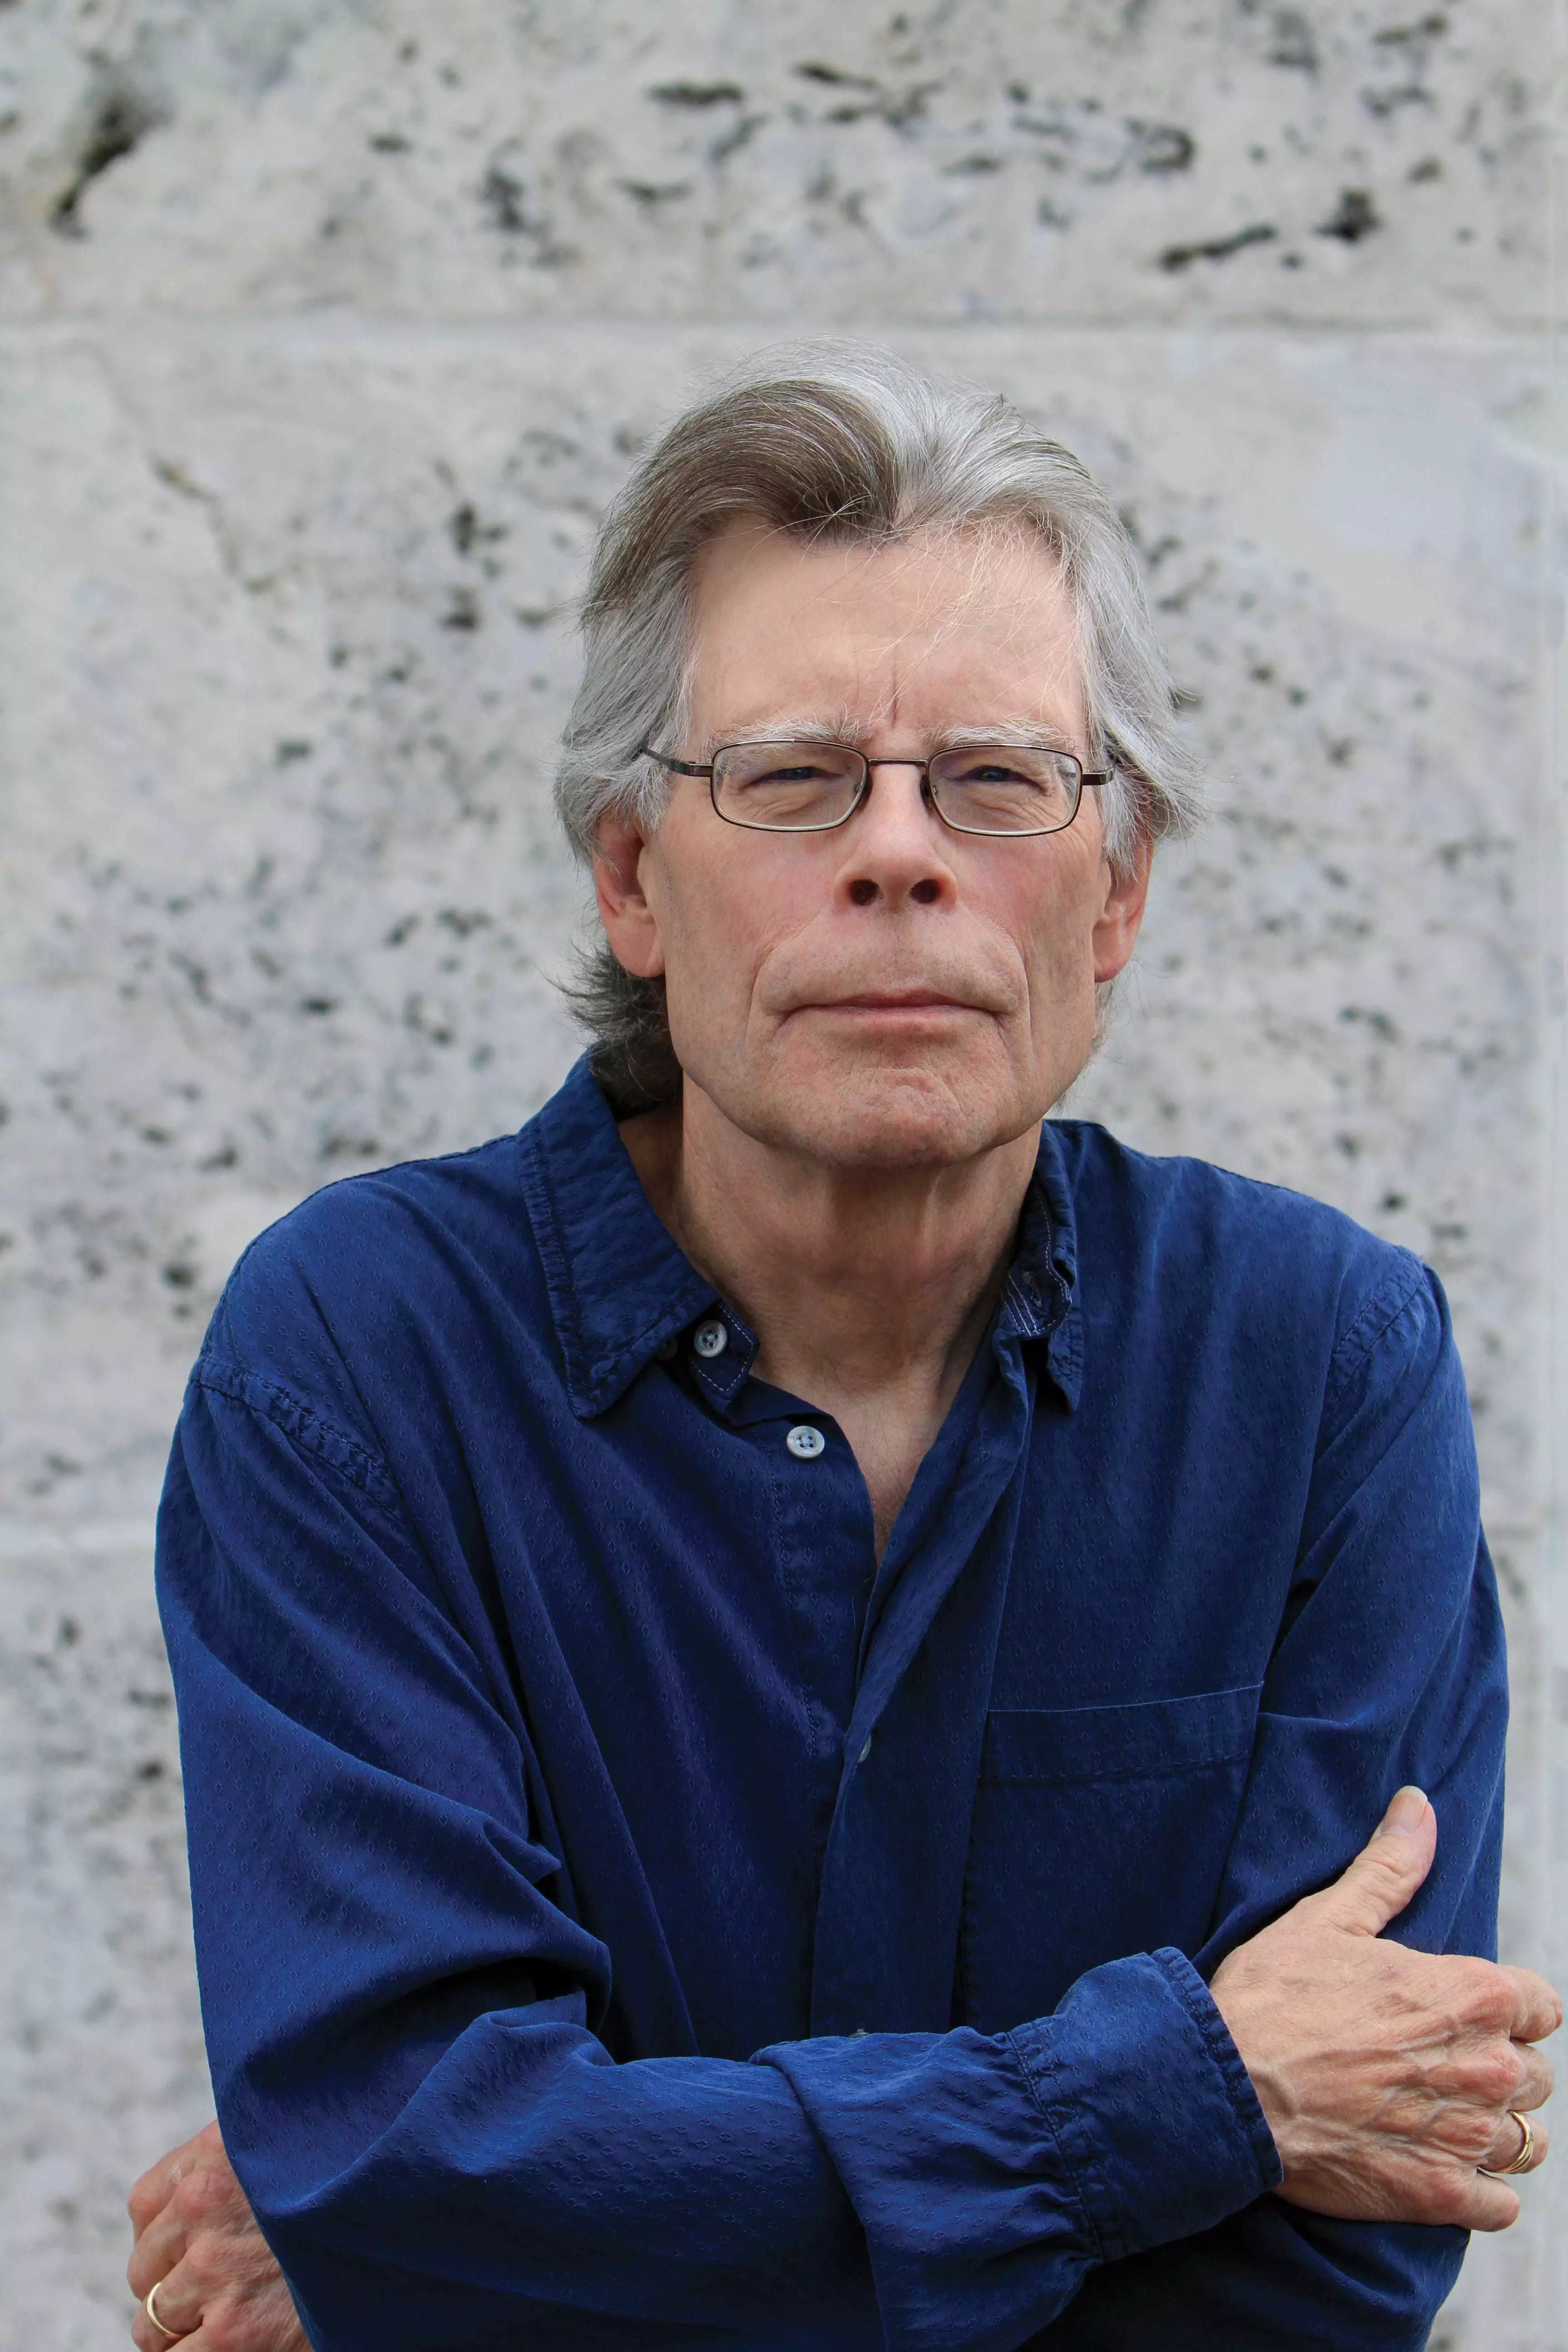 Another tale from the twisted mind of Stephen King is being turned into a movie.